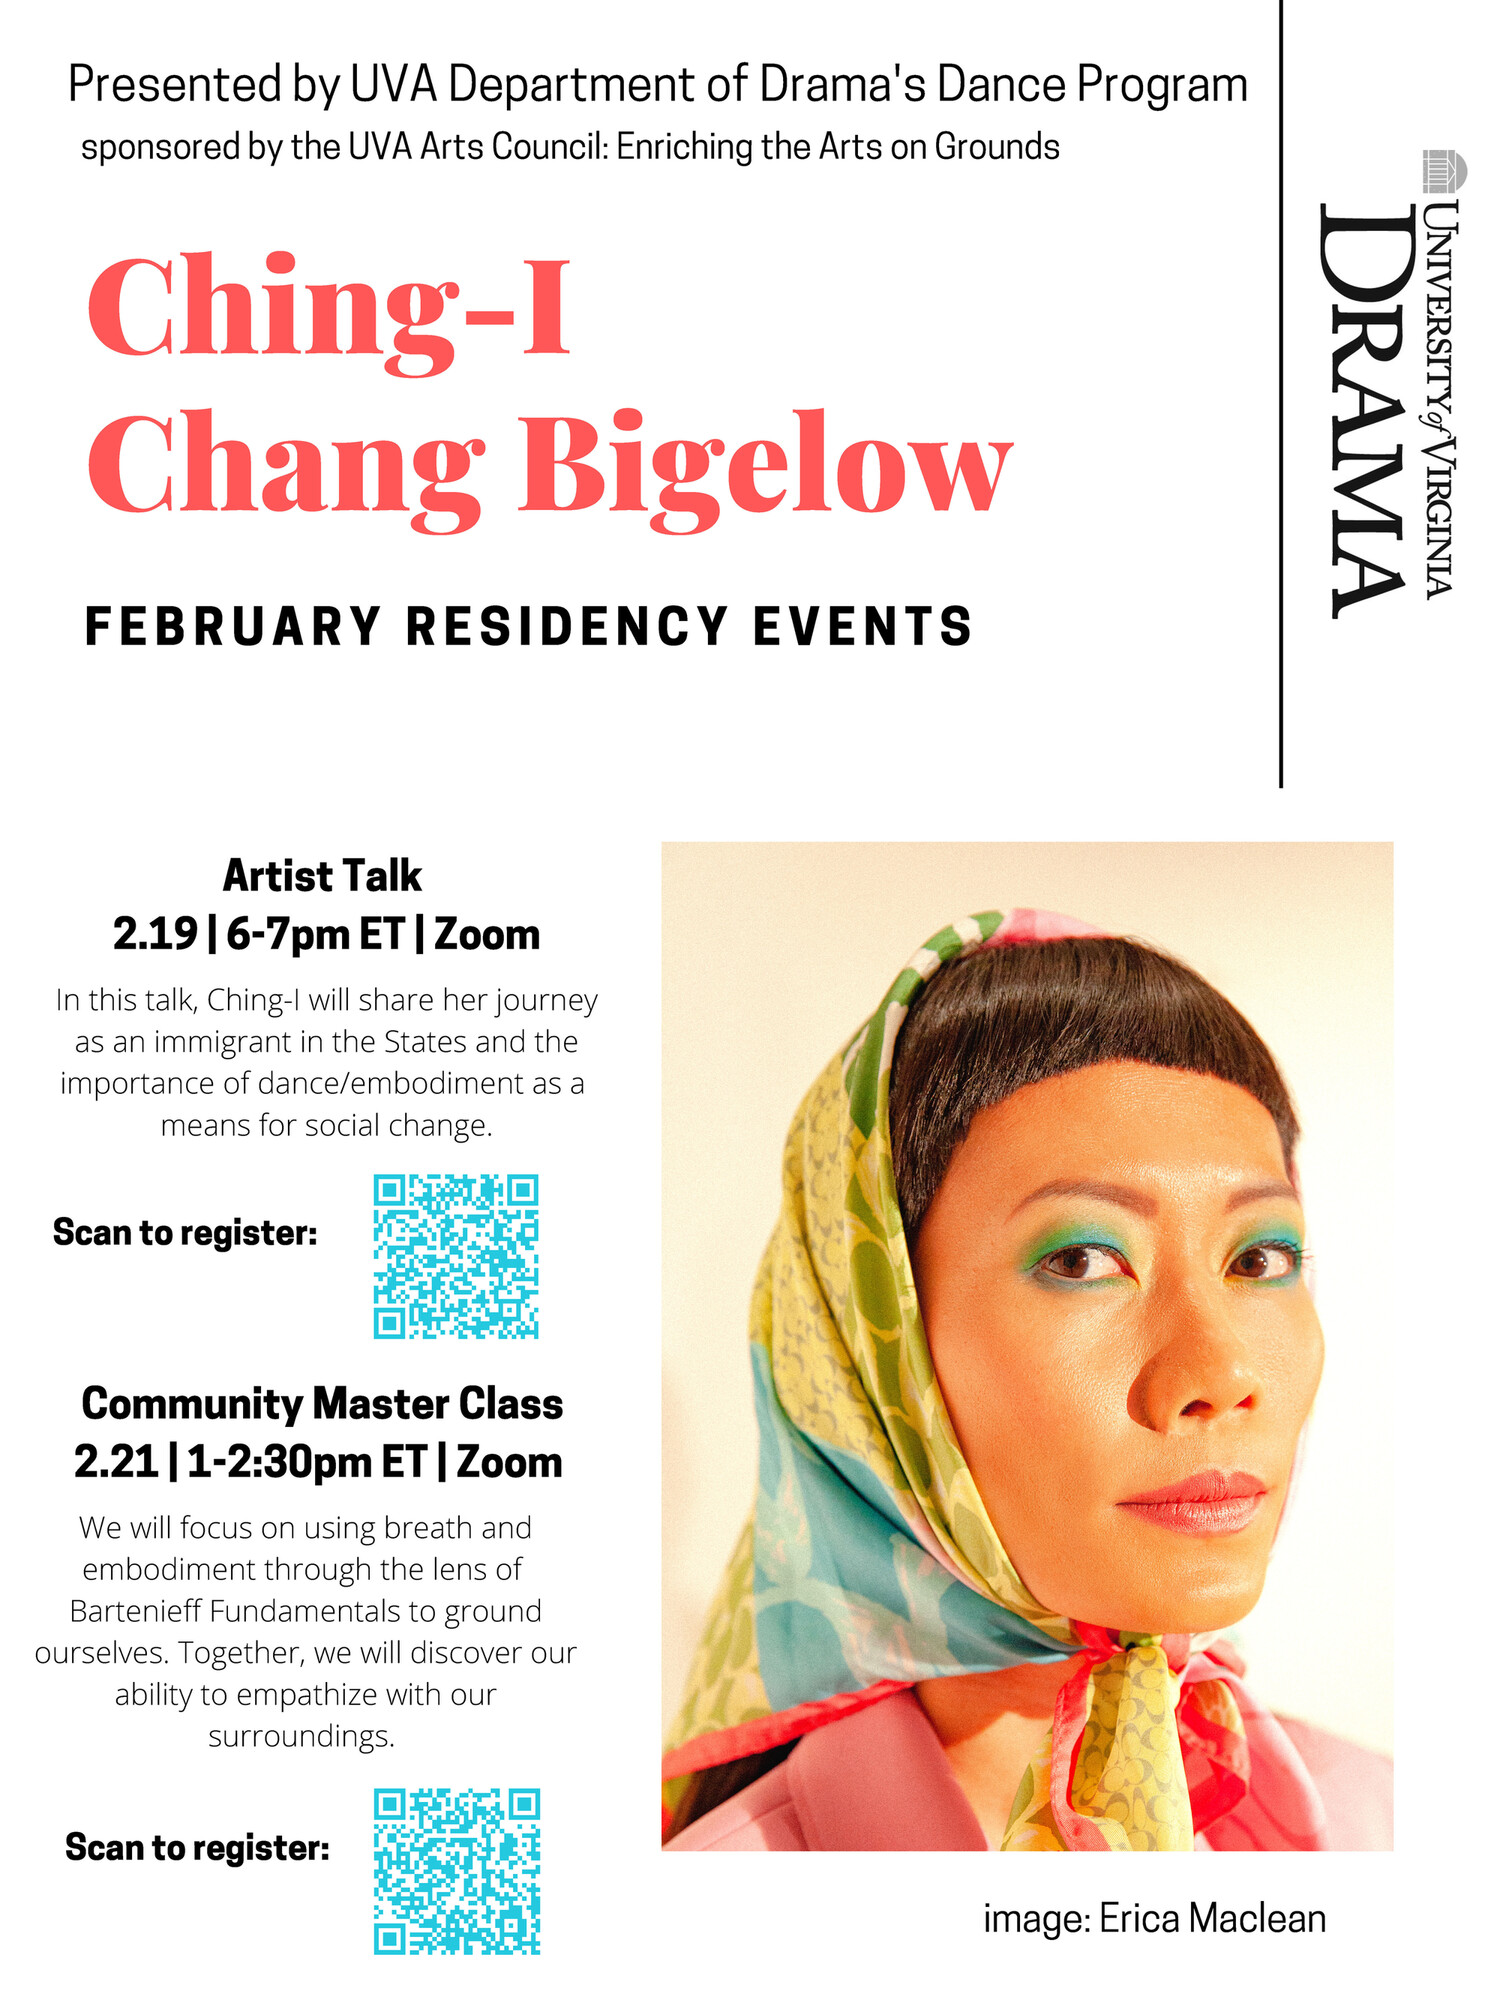 Ching-i Chang Bigelow: February Residency Events